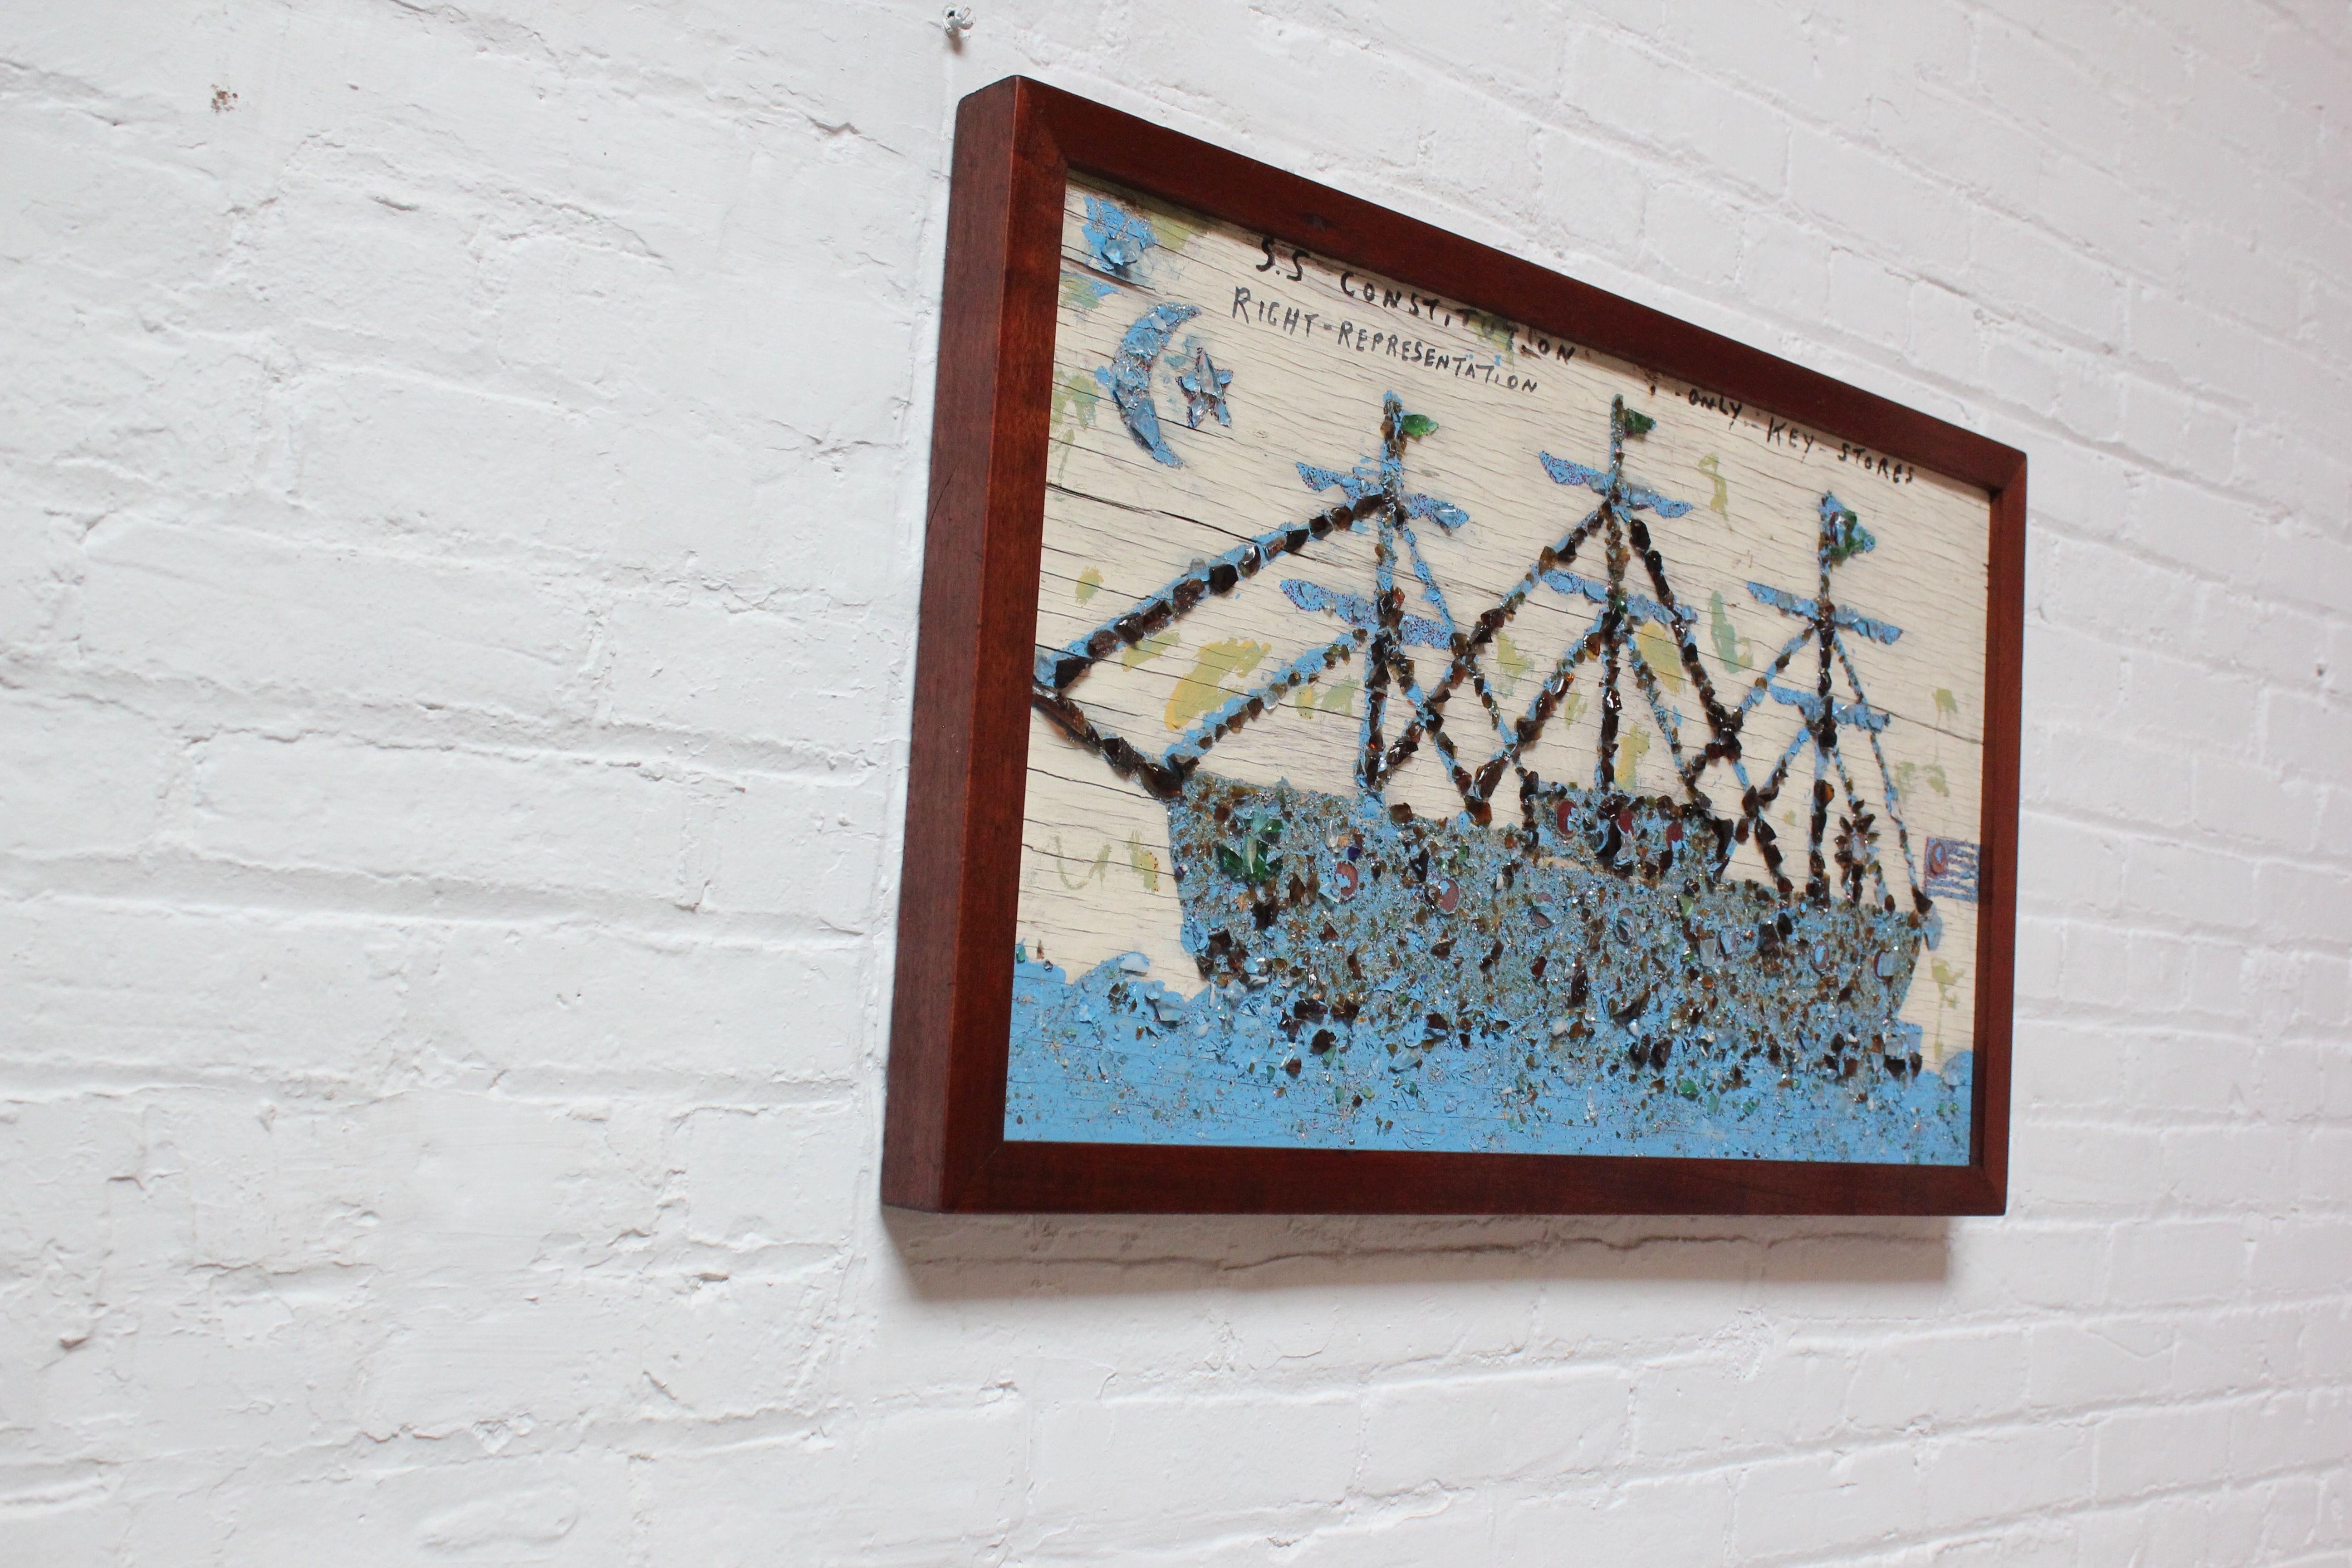 Folk Art depiction of the USS Constitution composed of cut sea glass mosaic with copper coin decorative accents and hand-painted details on wooden board (ca. 1970s, USA). The text at the top reads: SS - Constitution Right-Representation - Only Key